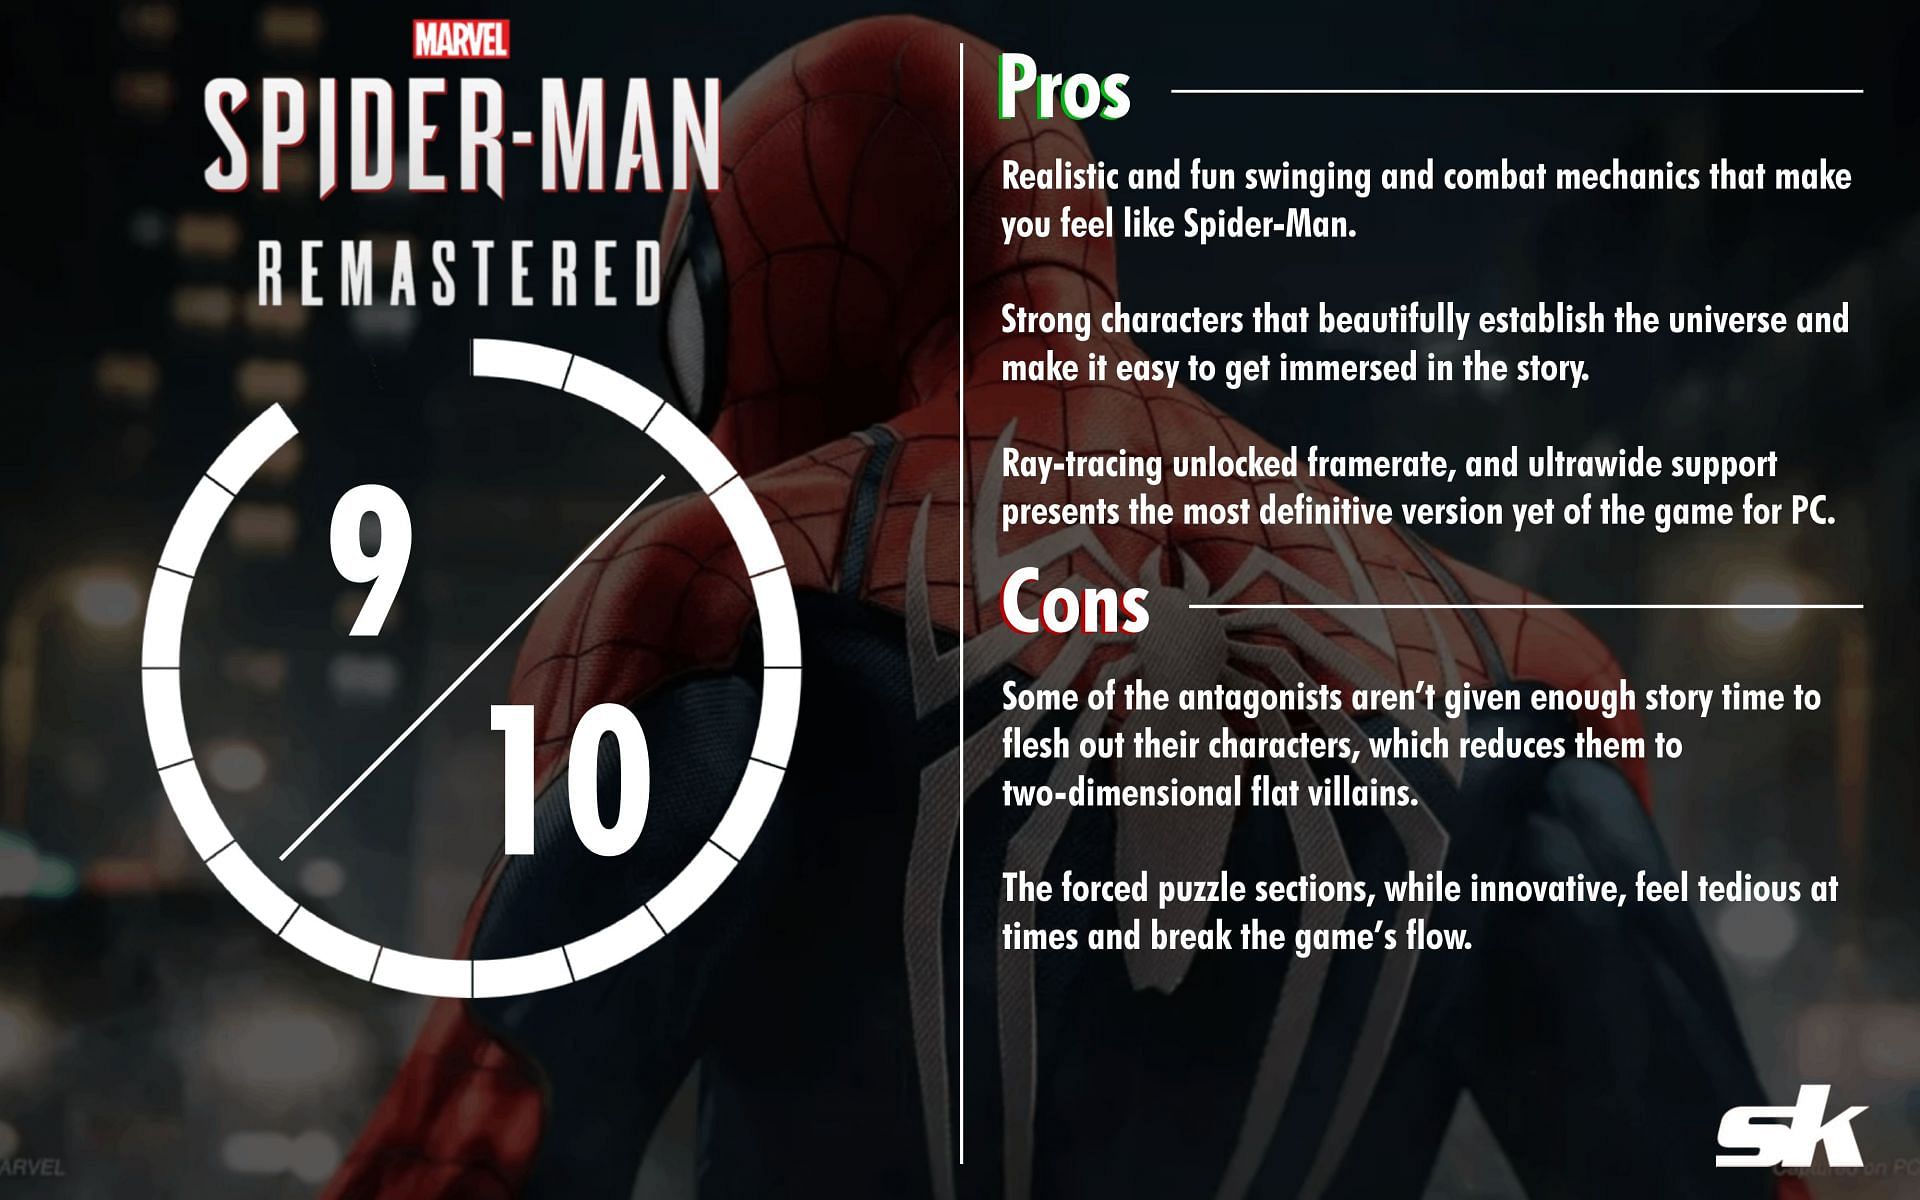 Spider Man remastered: Marvel's Spider-Man Remastered is finally coming to  PC. Check out features, compatibility & release date - The Economic Times